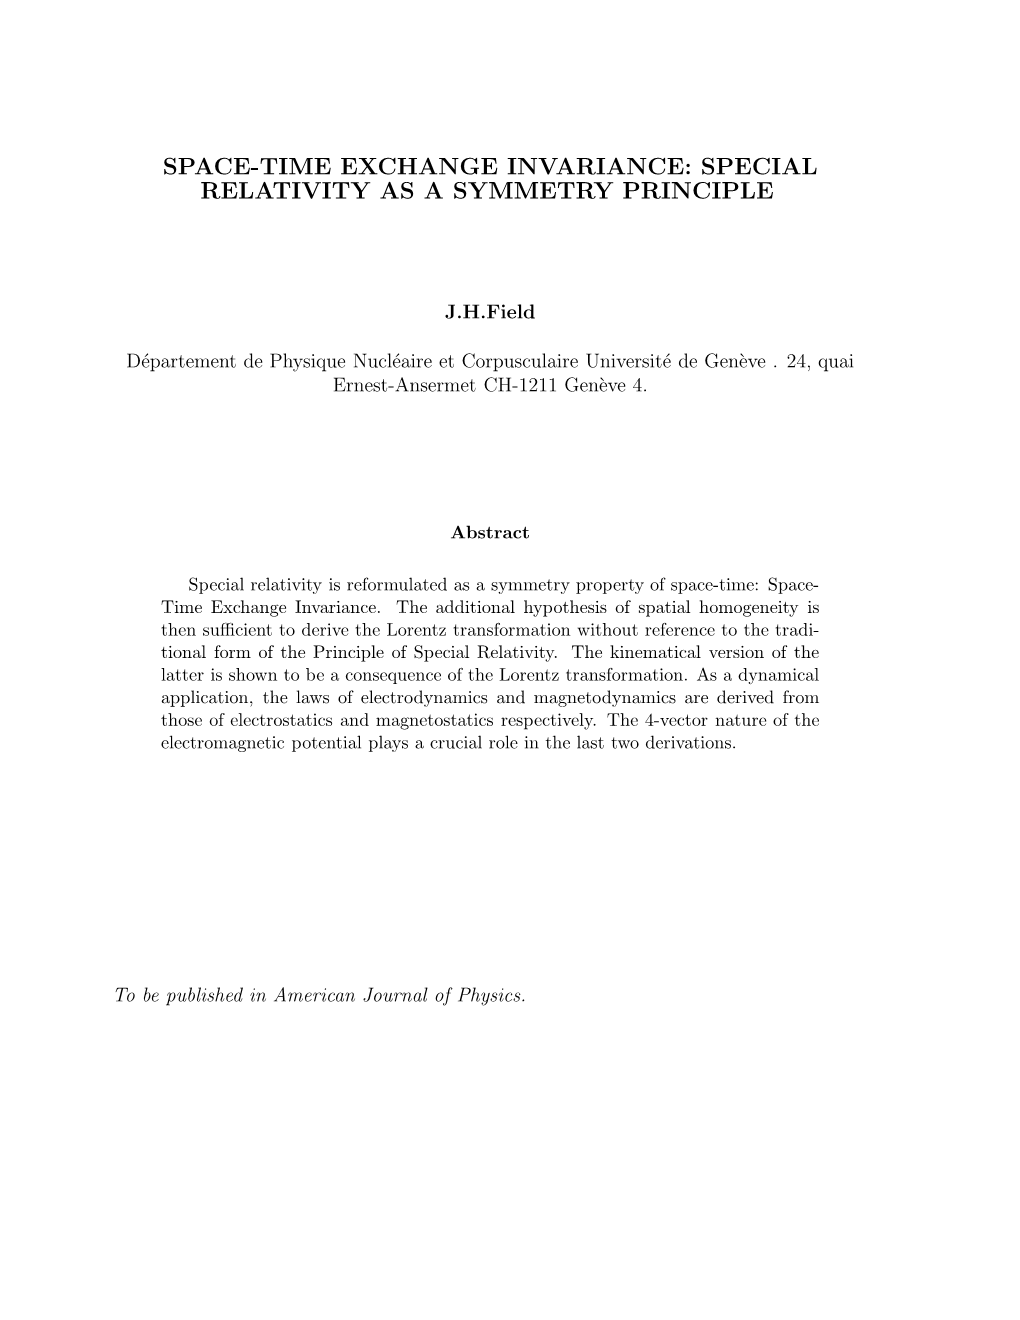 Space-Time Exchange Invariance: Special Relativity As a Symmetry Principle